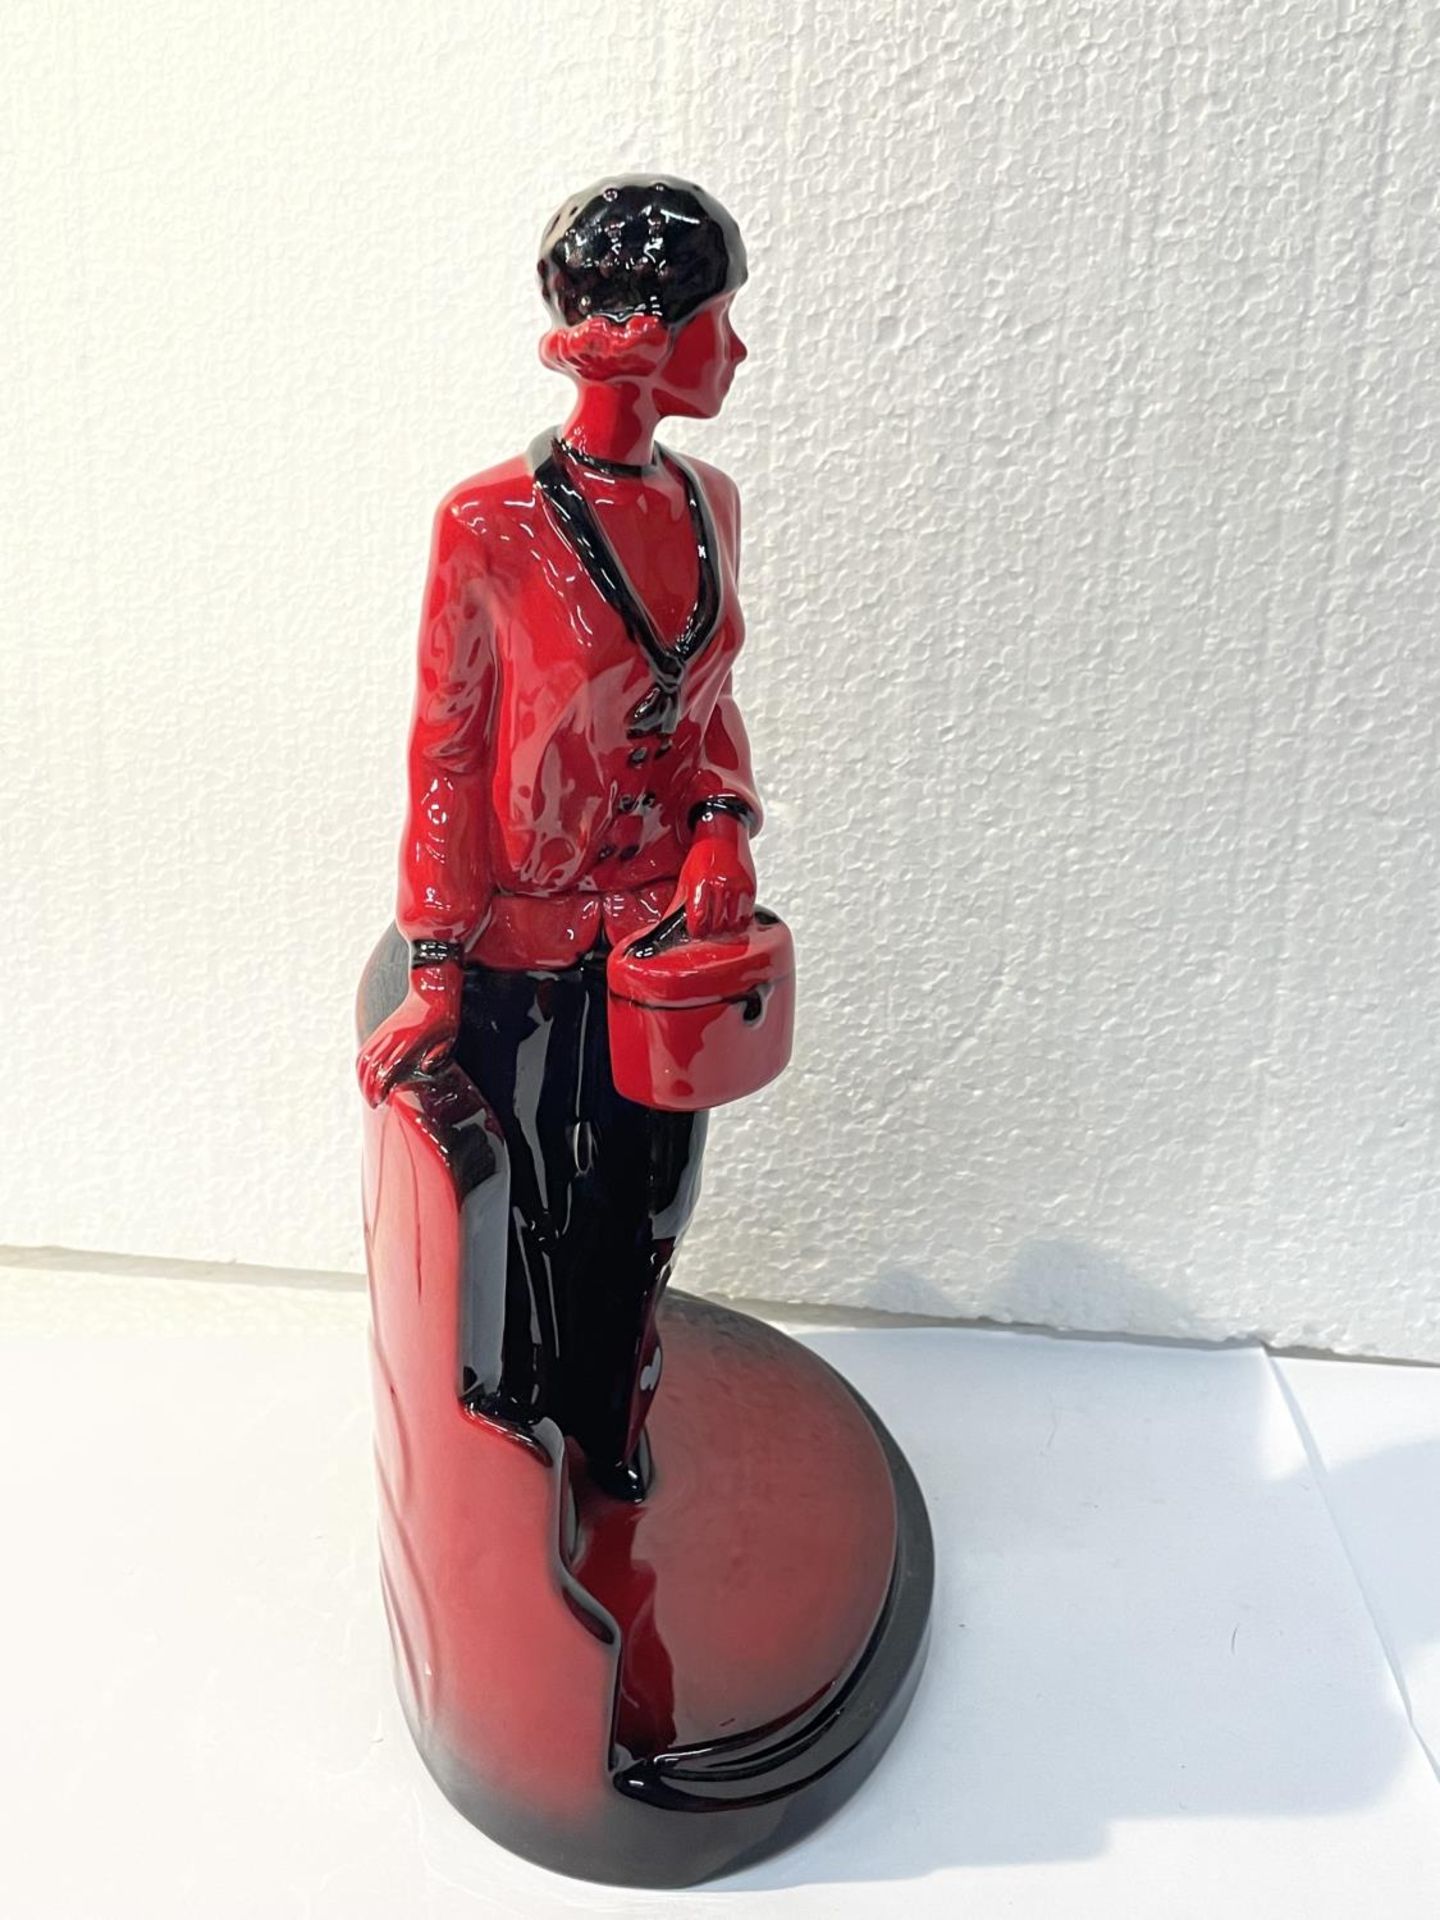 A PEGGY DAVIES RUBY FUSION ART DECO FIGURINE - 26 CM IN HEIGHT - Image 2 of 5